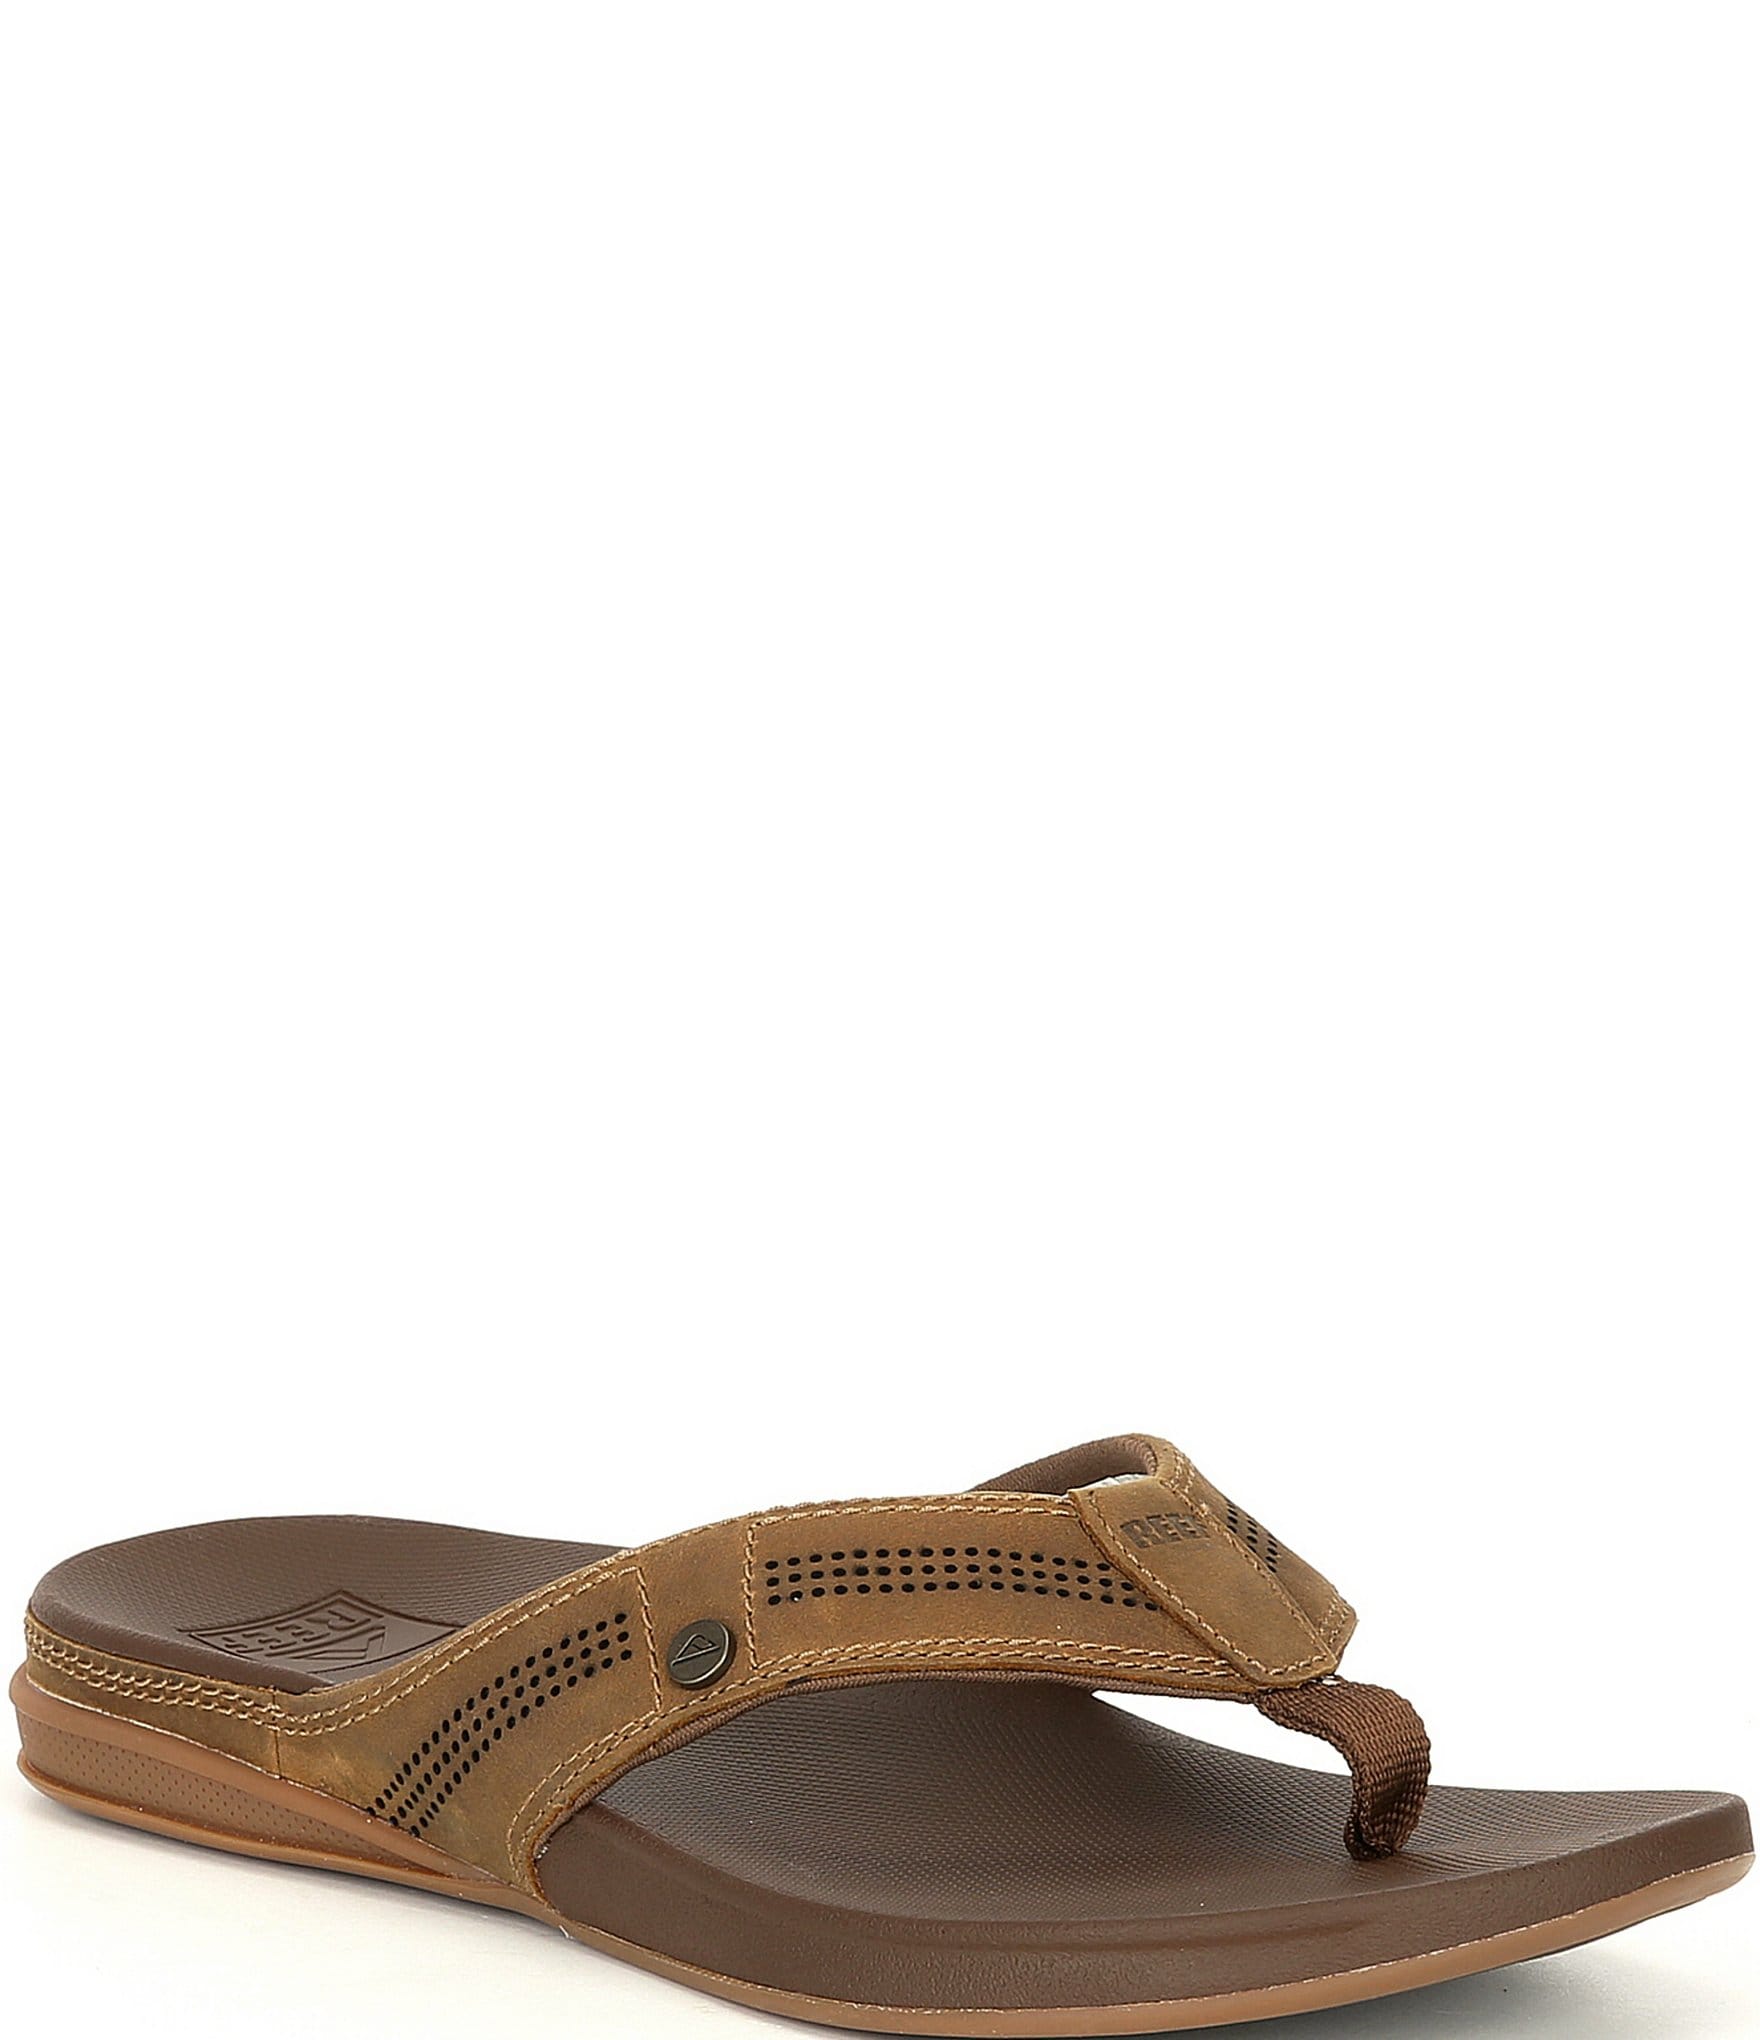 Reef Mens Sandals Cushion Bounce Phantom LE Full Grain Leather Upper with Padded Lining 